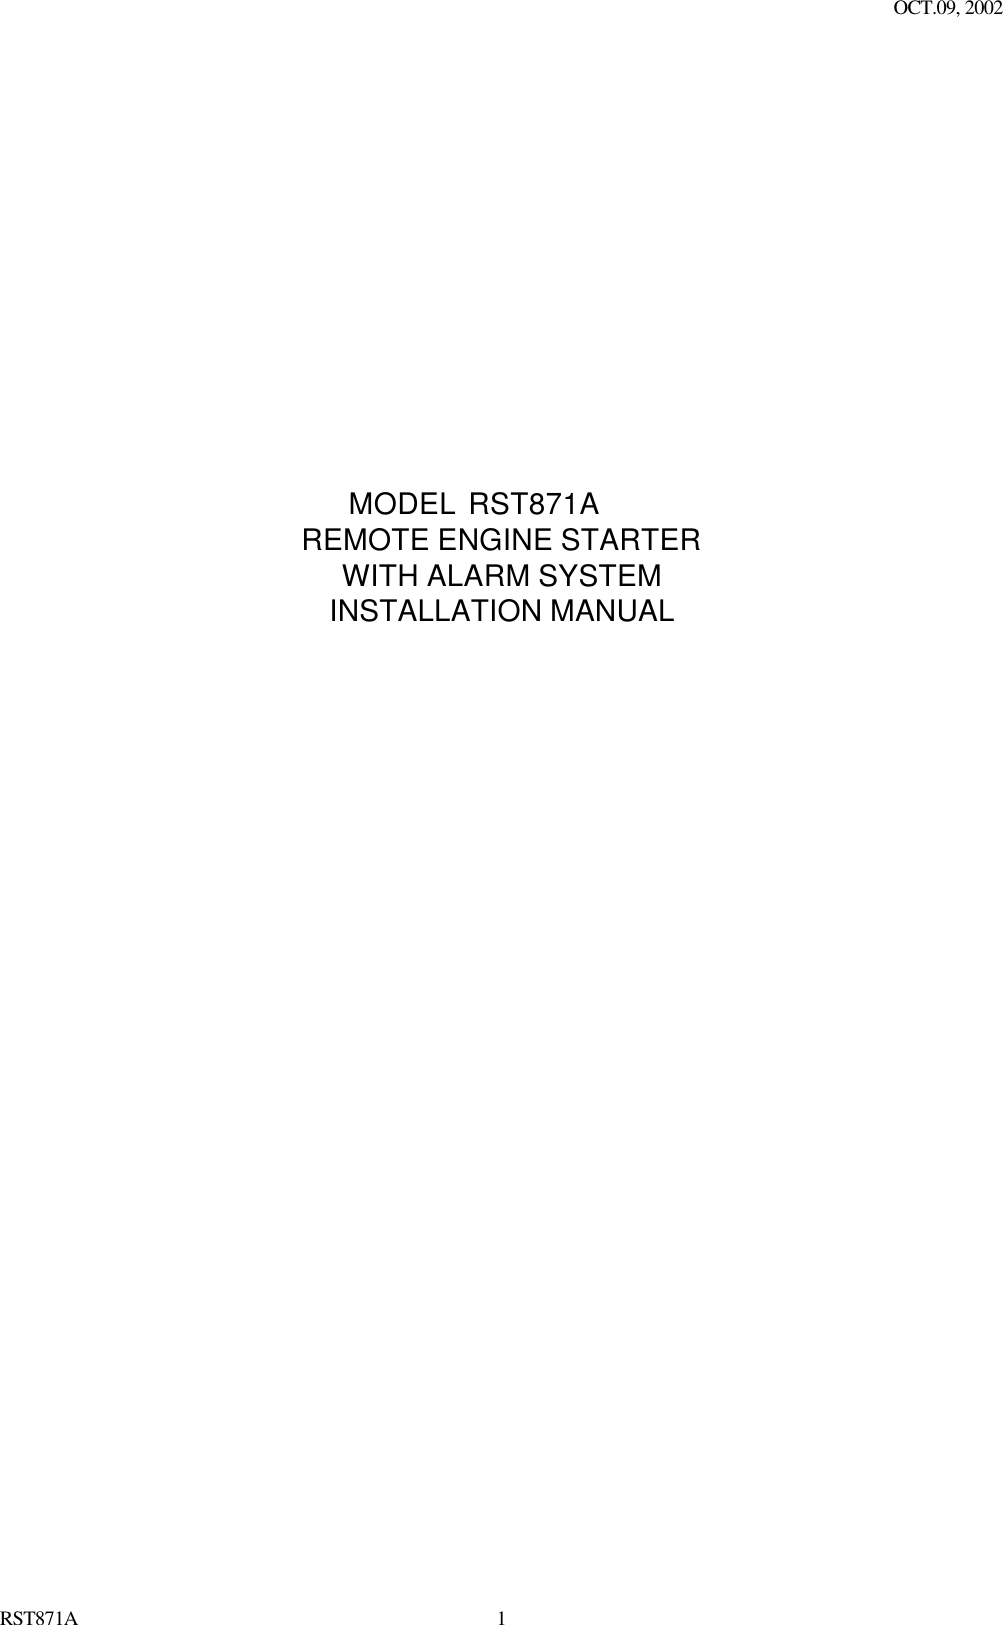 OCT.09, 2002 RST871A 1                    MODEL RST871A REMOTE ENGINE STARTER WITH ALARM SYSTEM INSTALLATION MANUAL                           